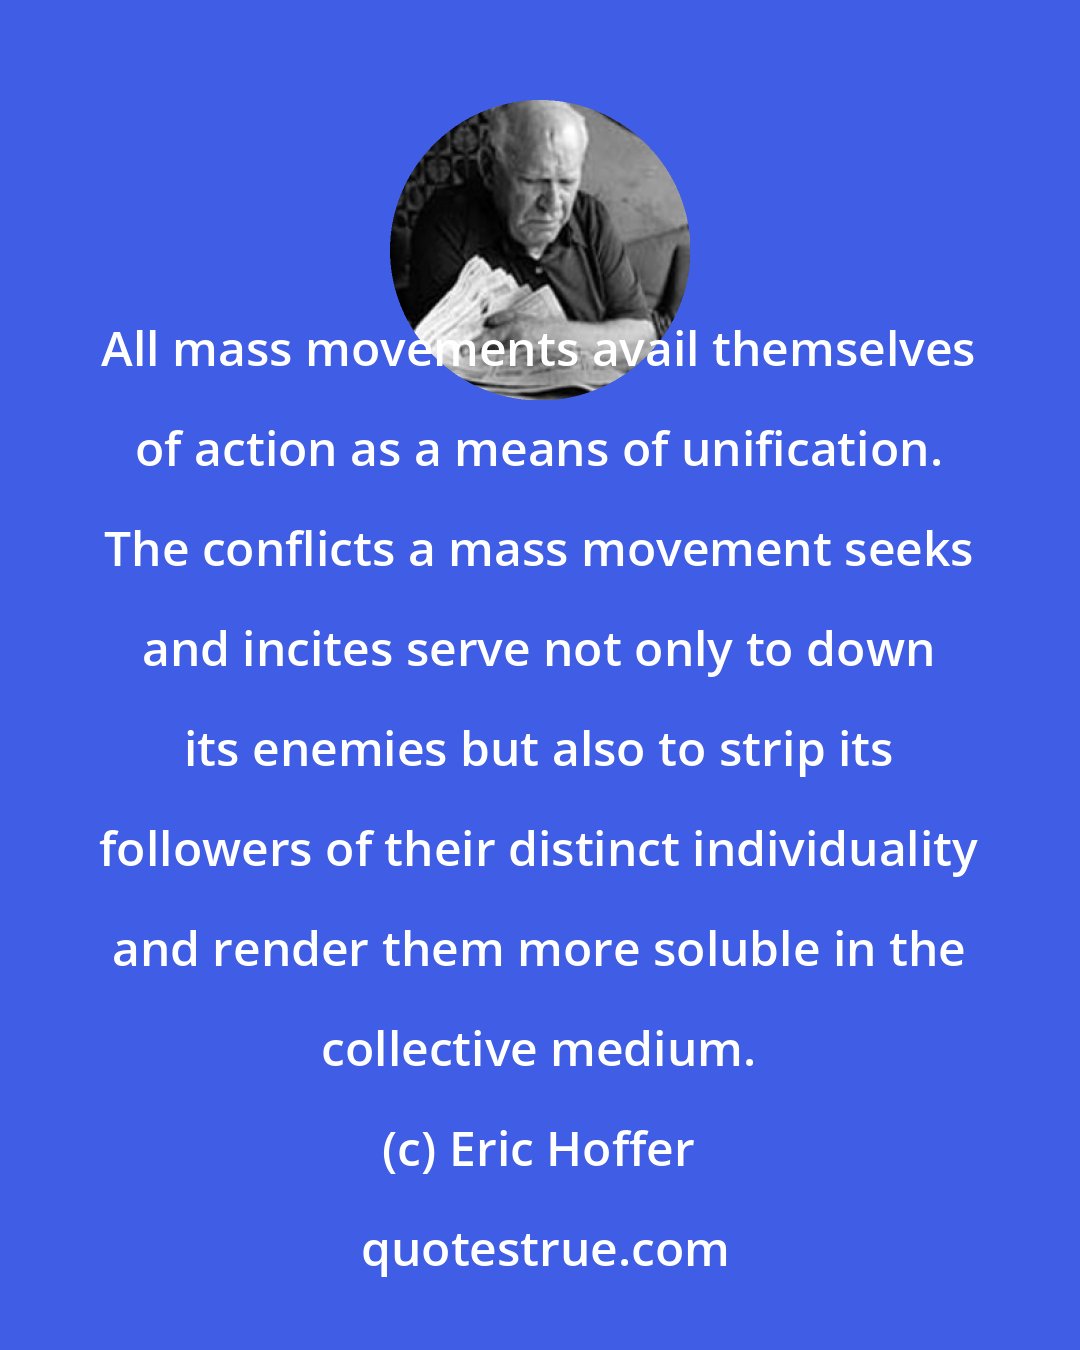 Eric Hoffer: All mass movements avail themselves of action as a means of unification. The conflicts a mass movement seeks and incites serve not only to down its enemies but also to strip its followers of their distinct individuality and render them more soluble in the collective medium.